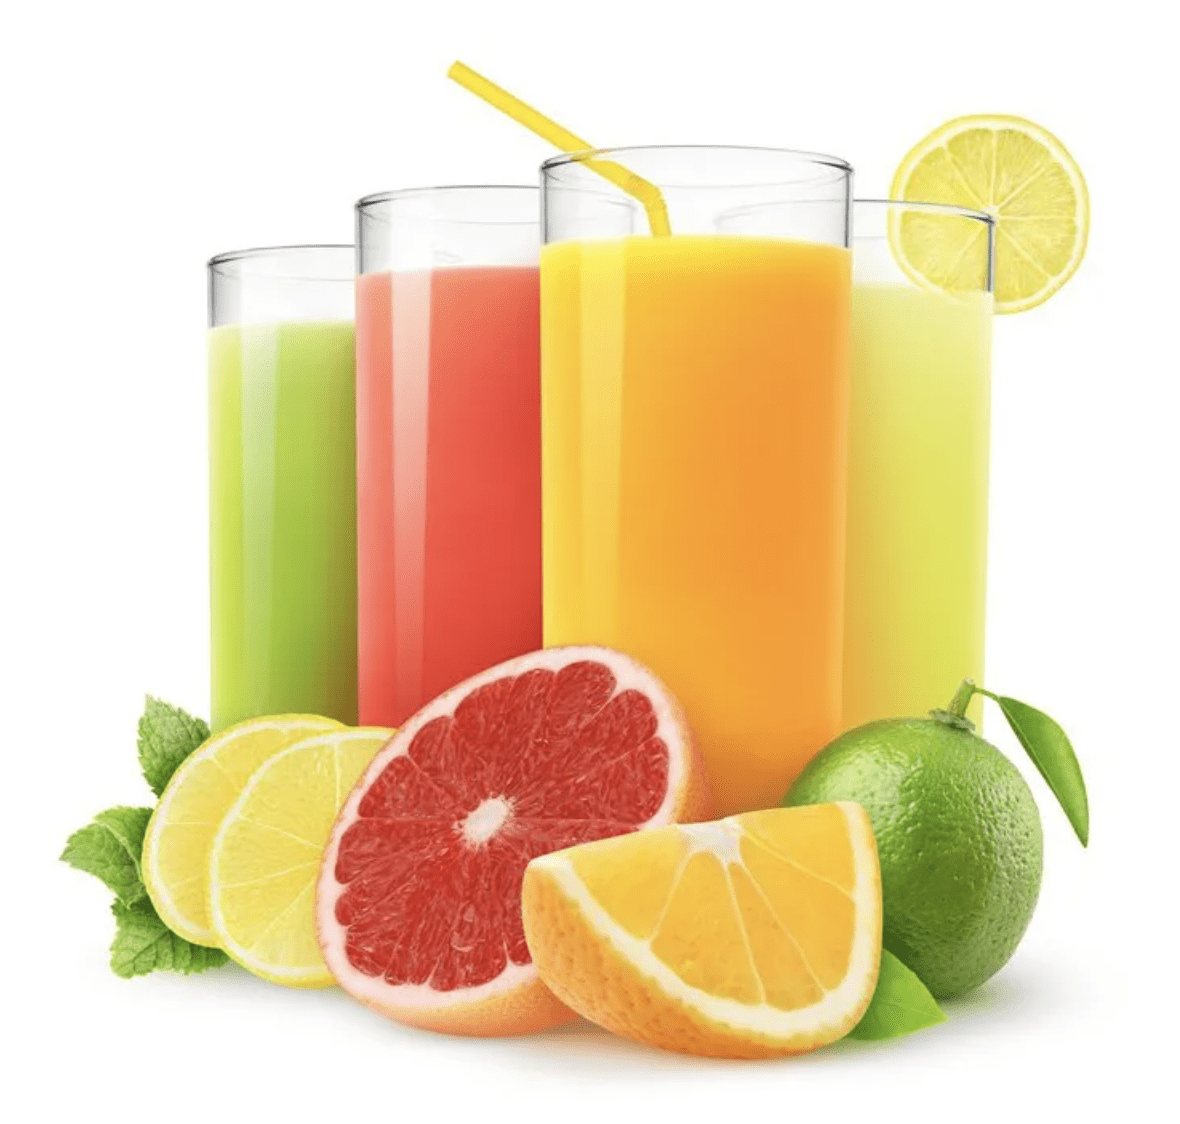 3 Insider Tips For Opening Your Own Juice Bar